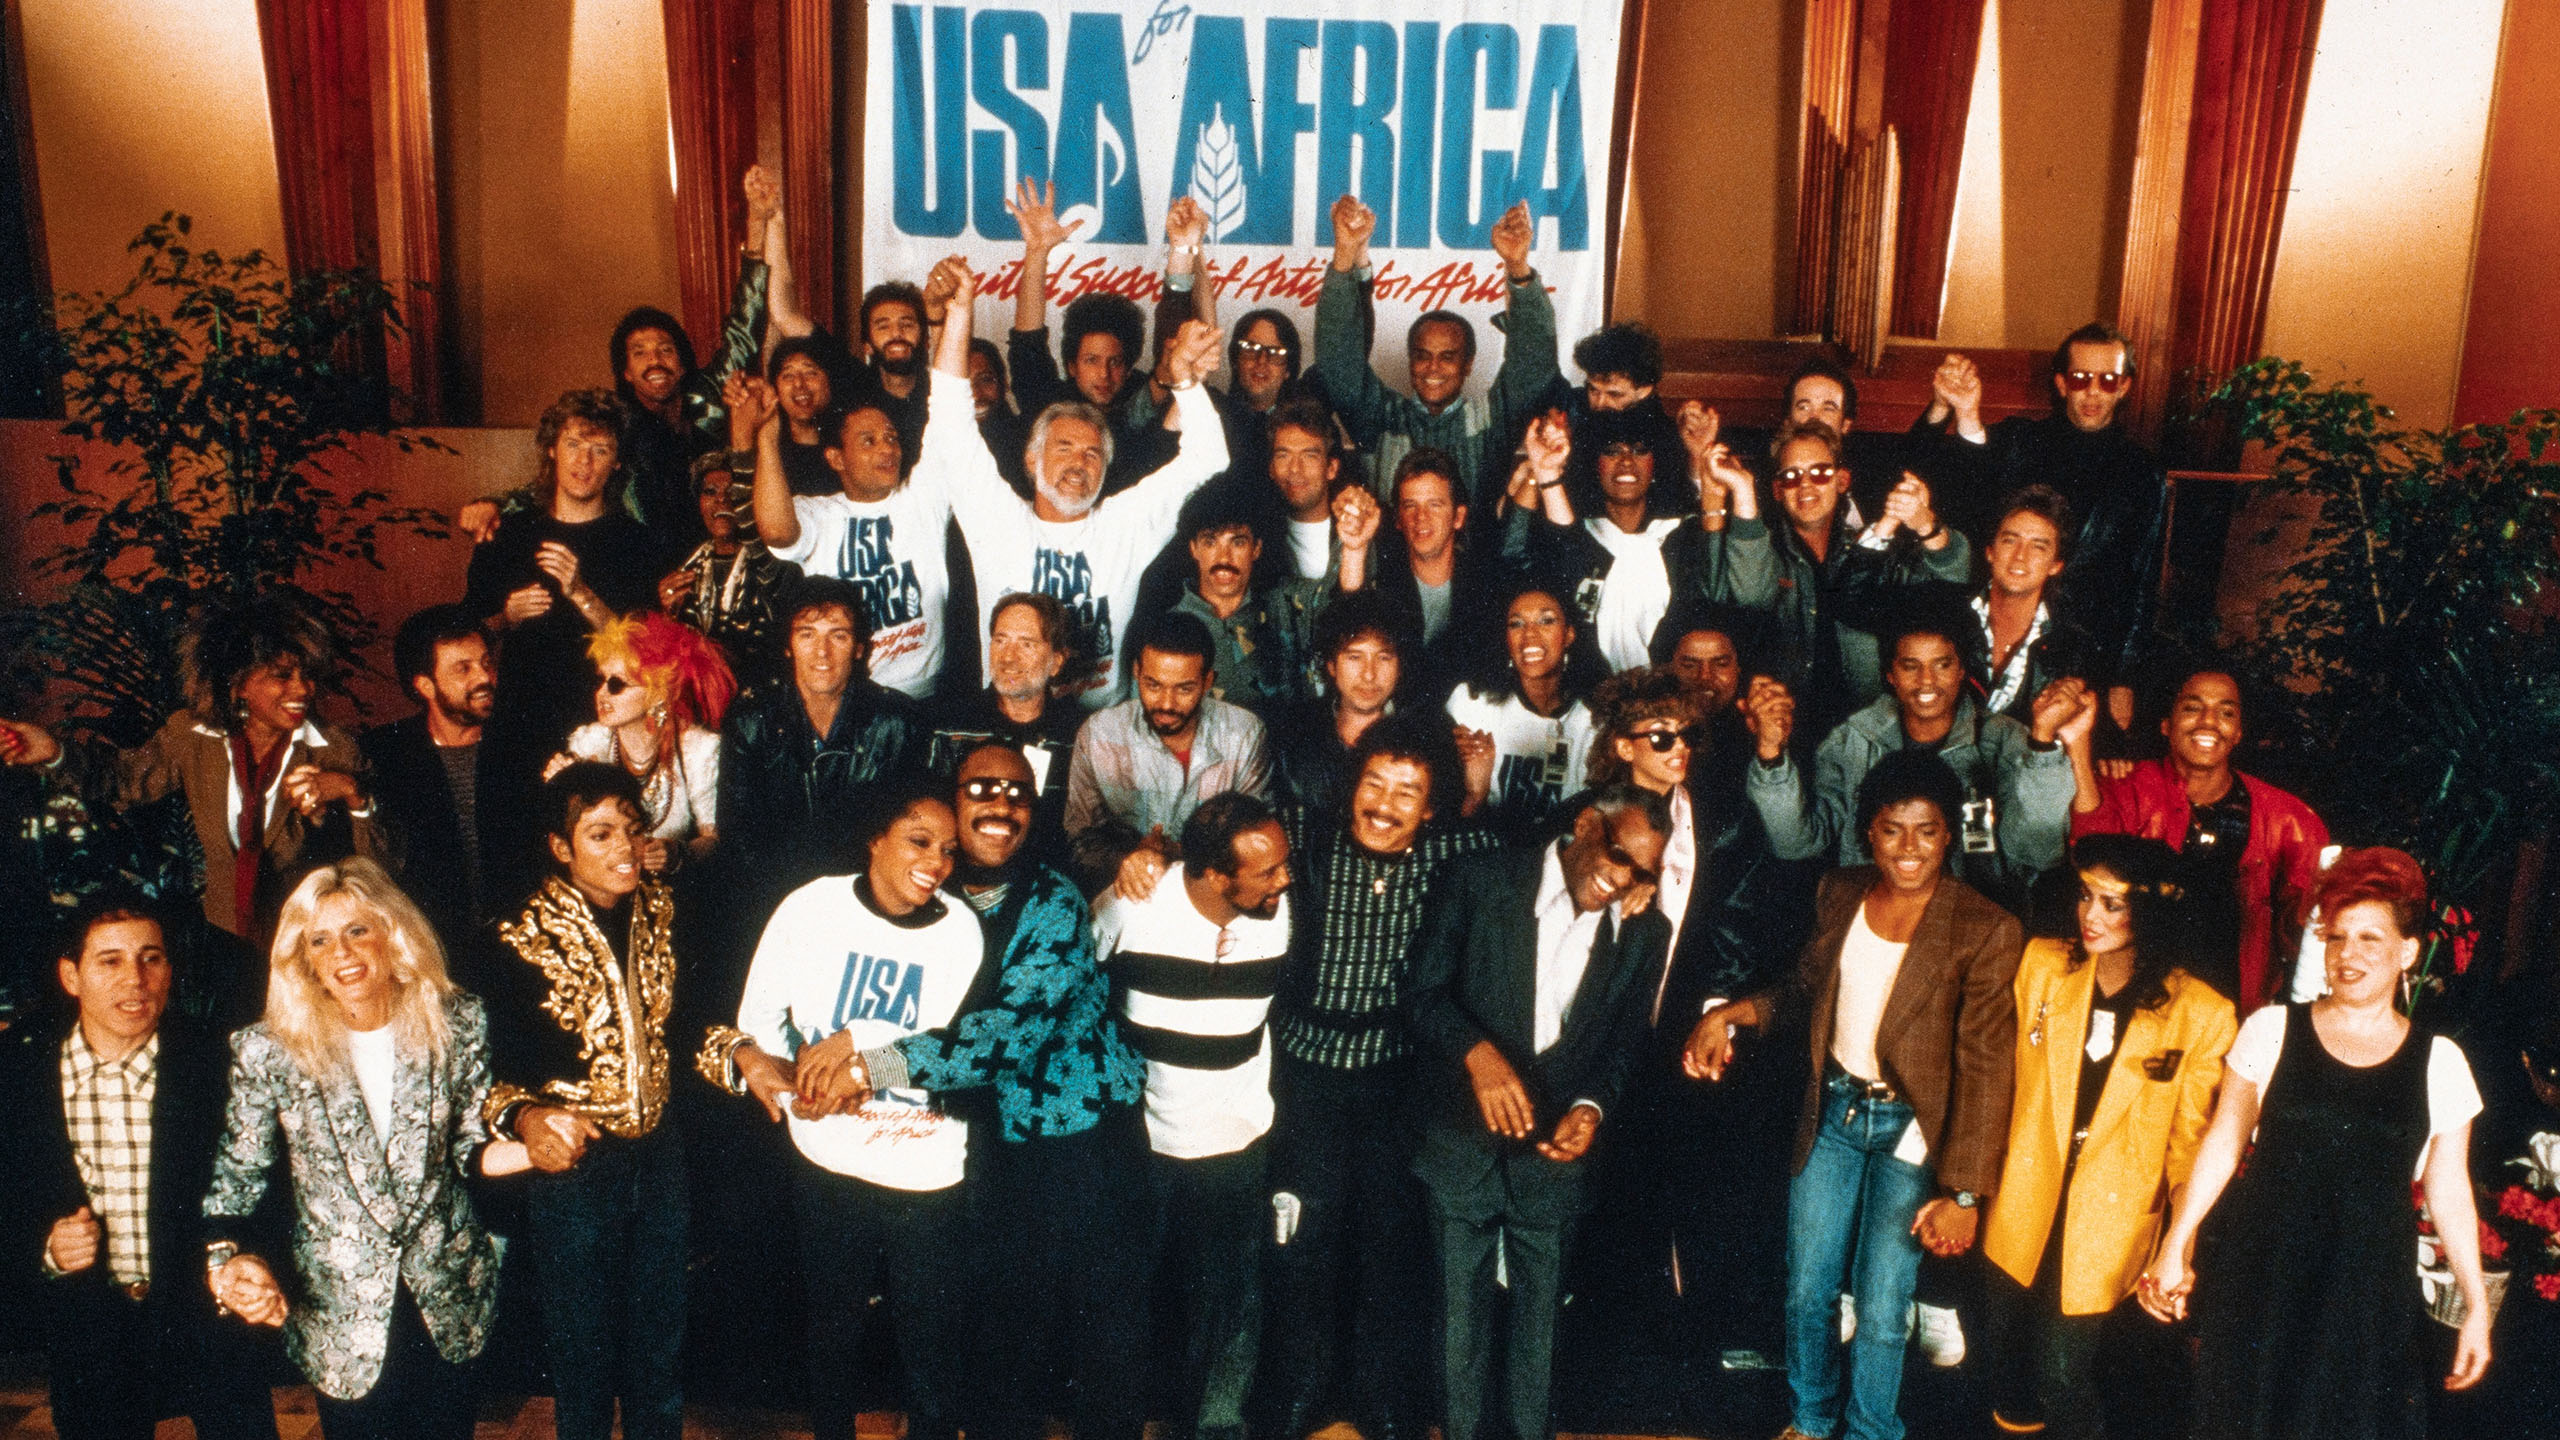 A film still from The Greatest Night in Pop that shows a large group of artists assembled under a sign for USA for Africa.